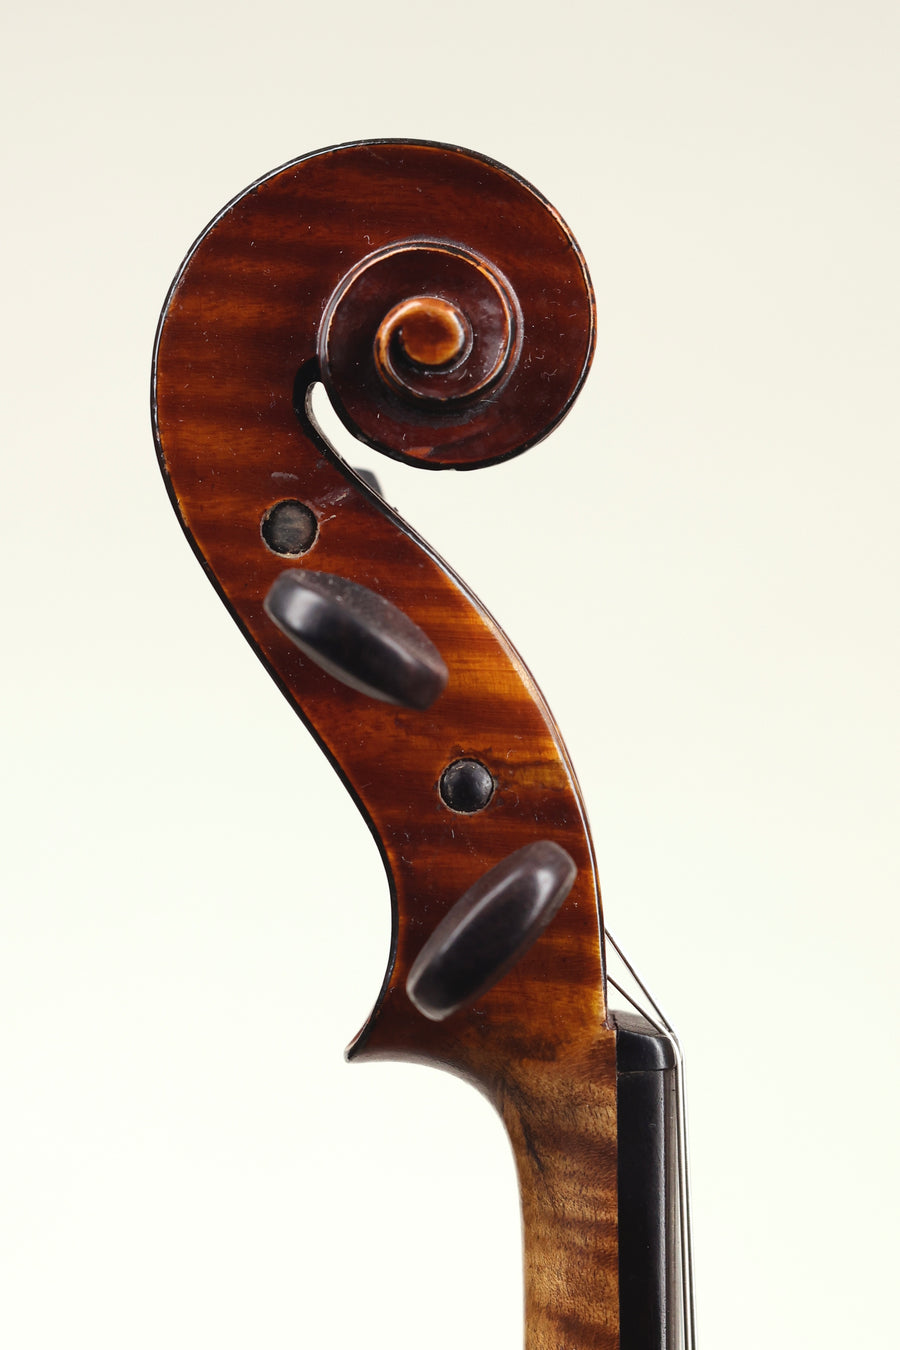 A Fine Violin Numbered 154 By Charles Resuche in Bordeaux, 1907.